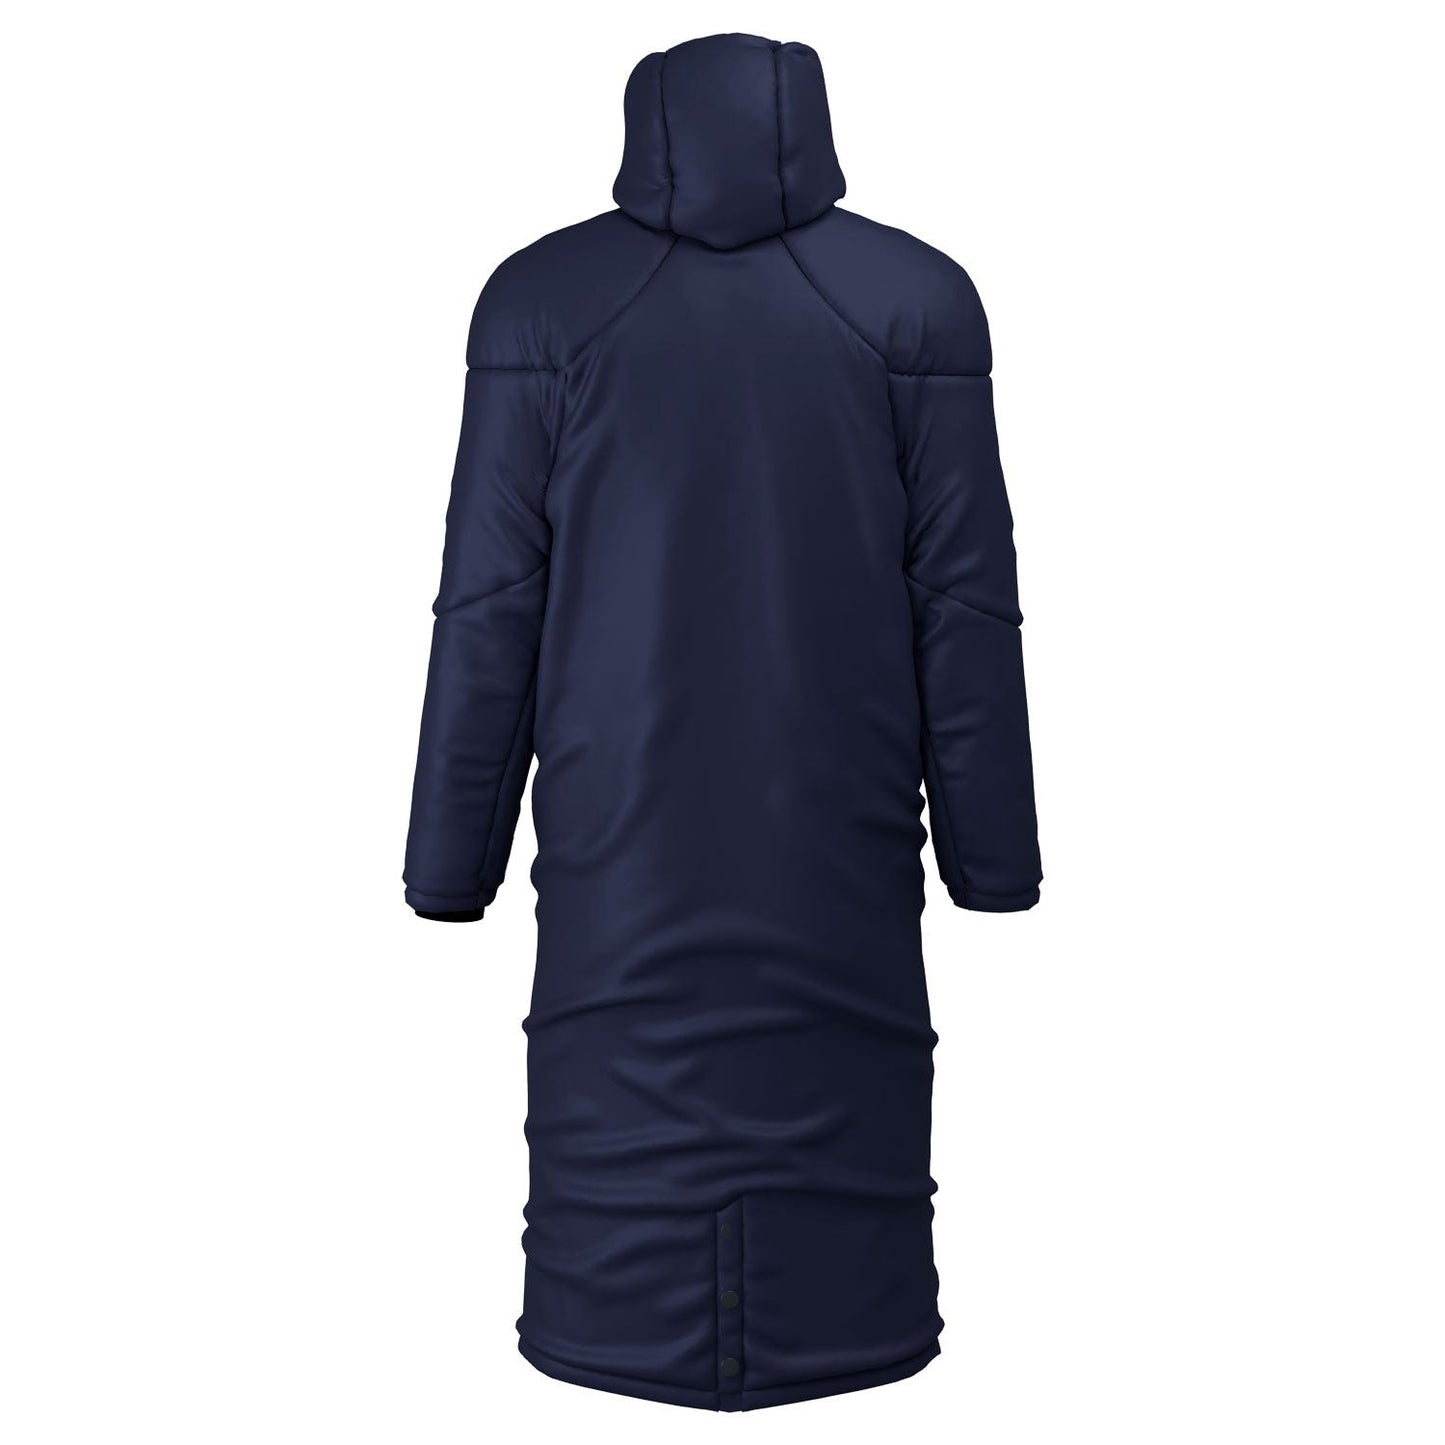 Oxford University Cycling Club Contoured Thermal Sub Coat